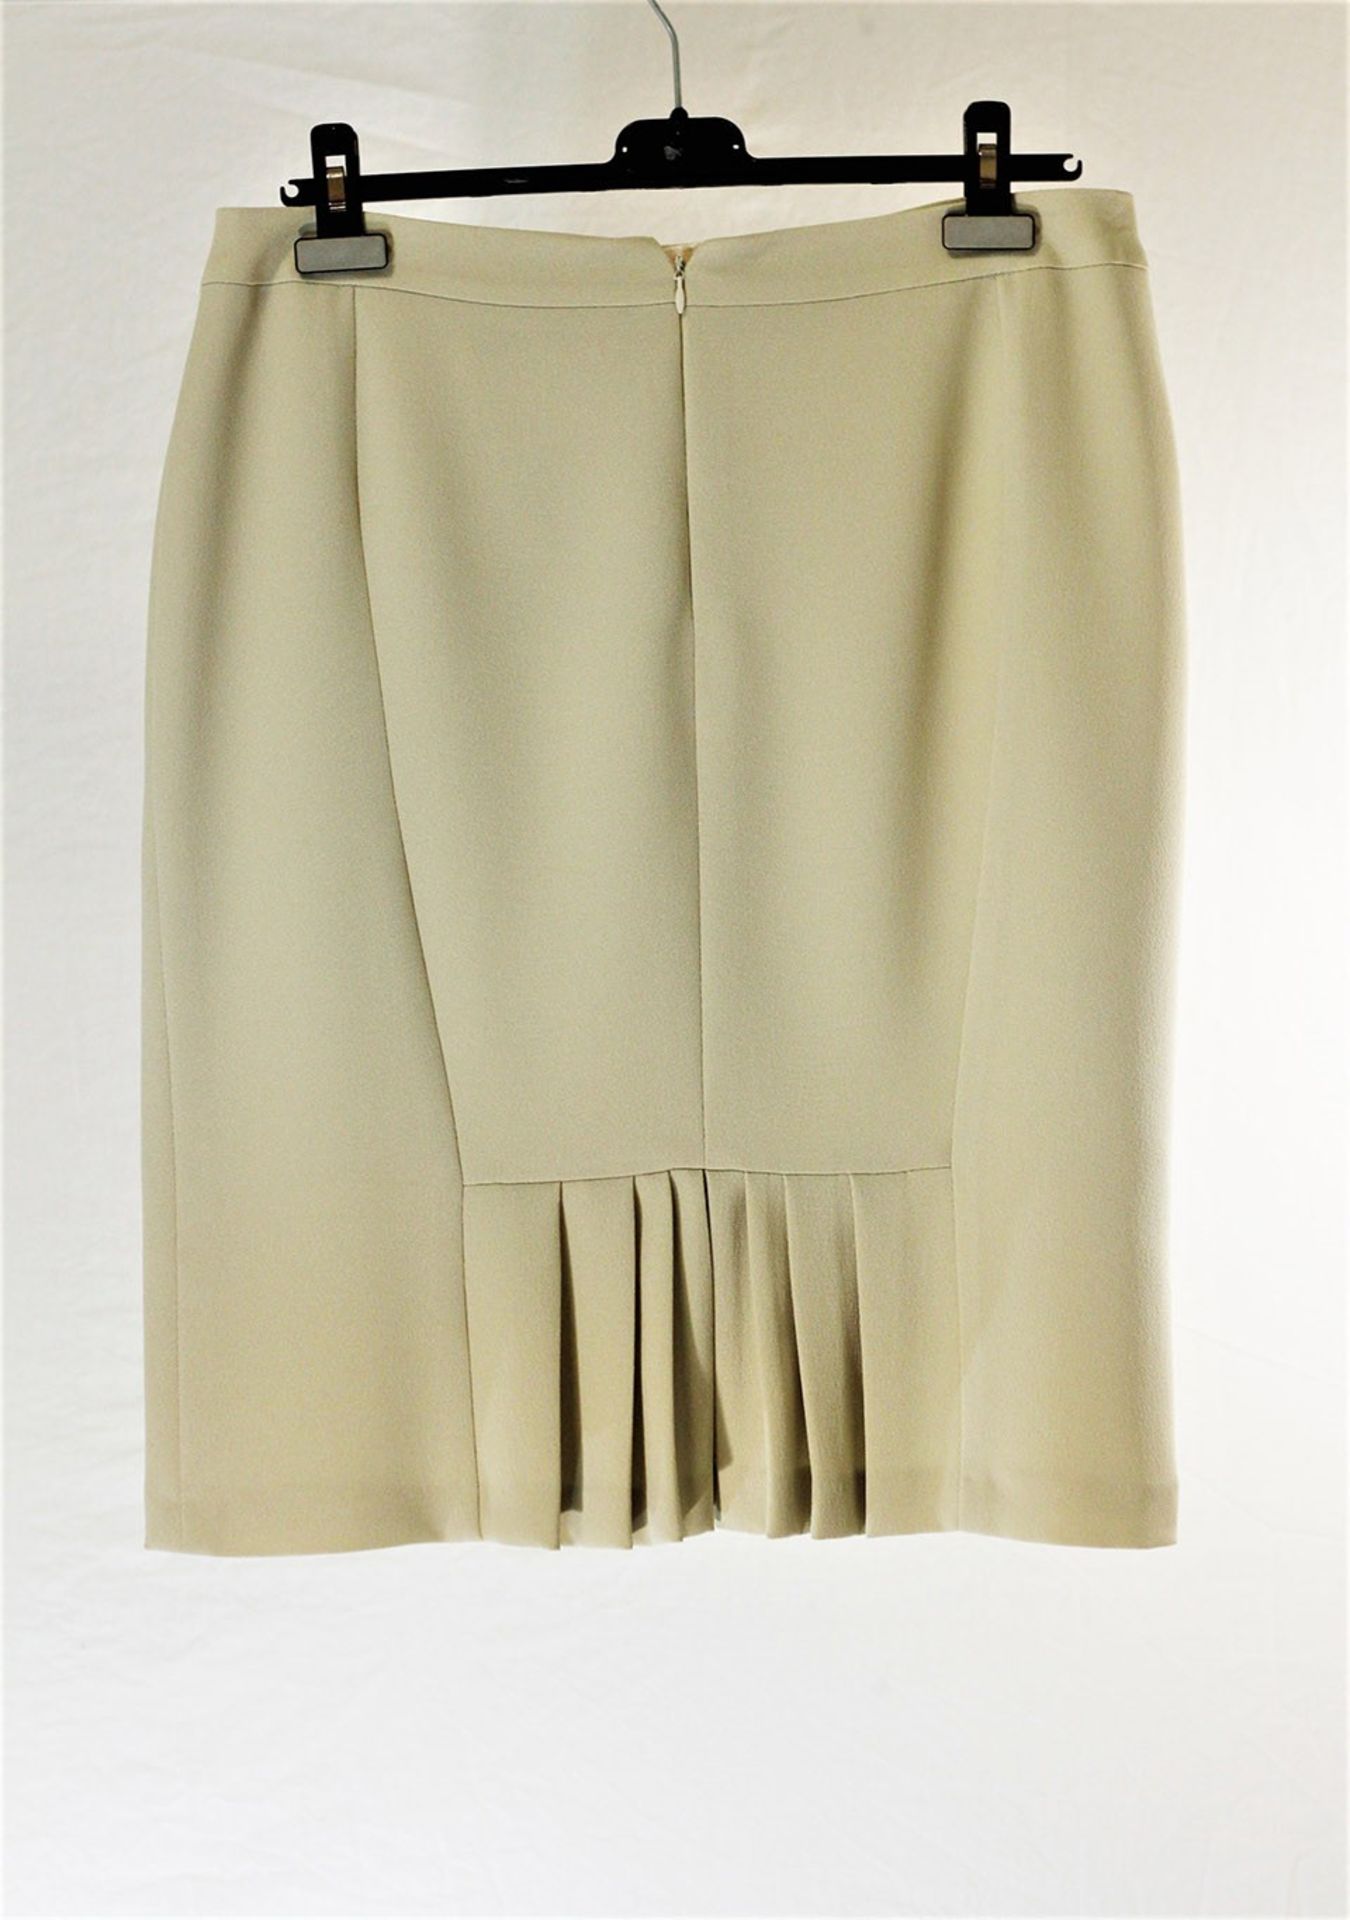 1 x Anne Belin Pistachio Skirt - Size: 16 - Material: 100% Polyester - From a High End Clothing - Image 7 of 11